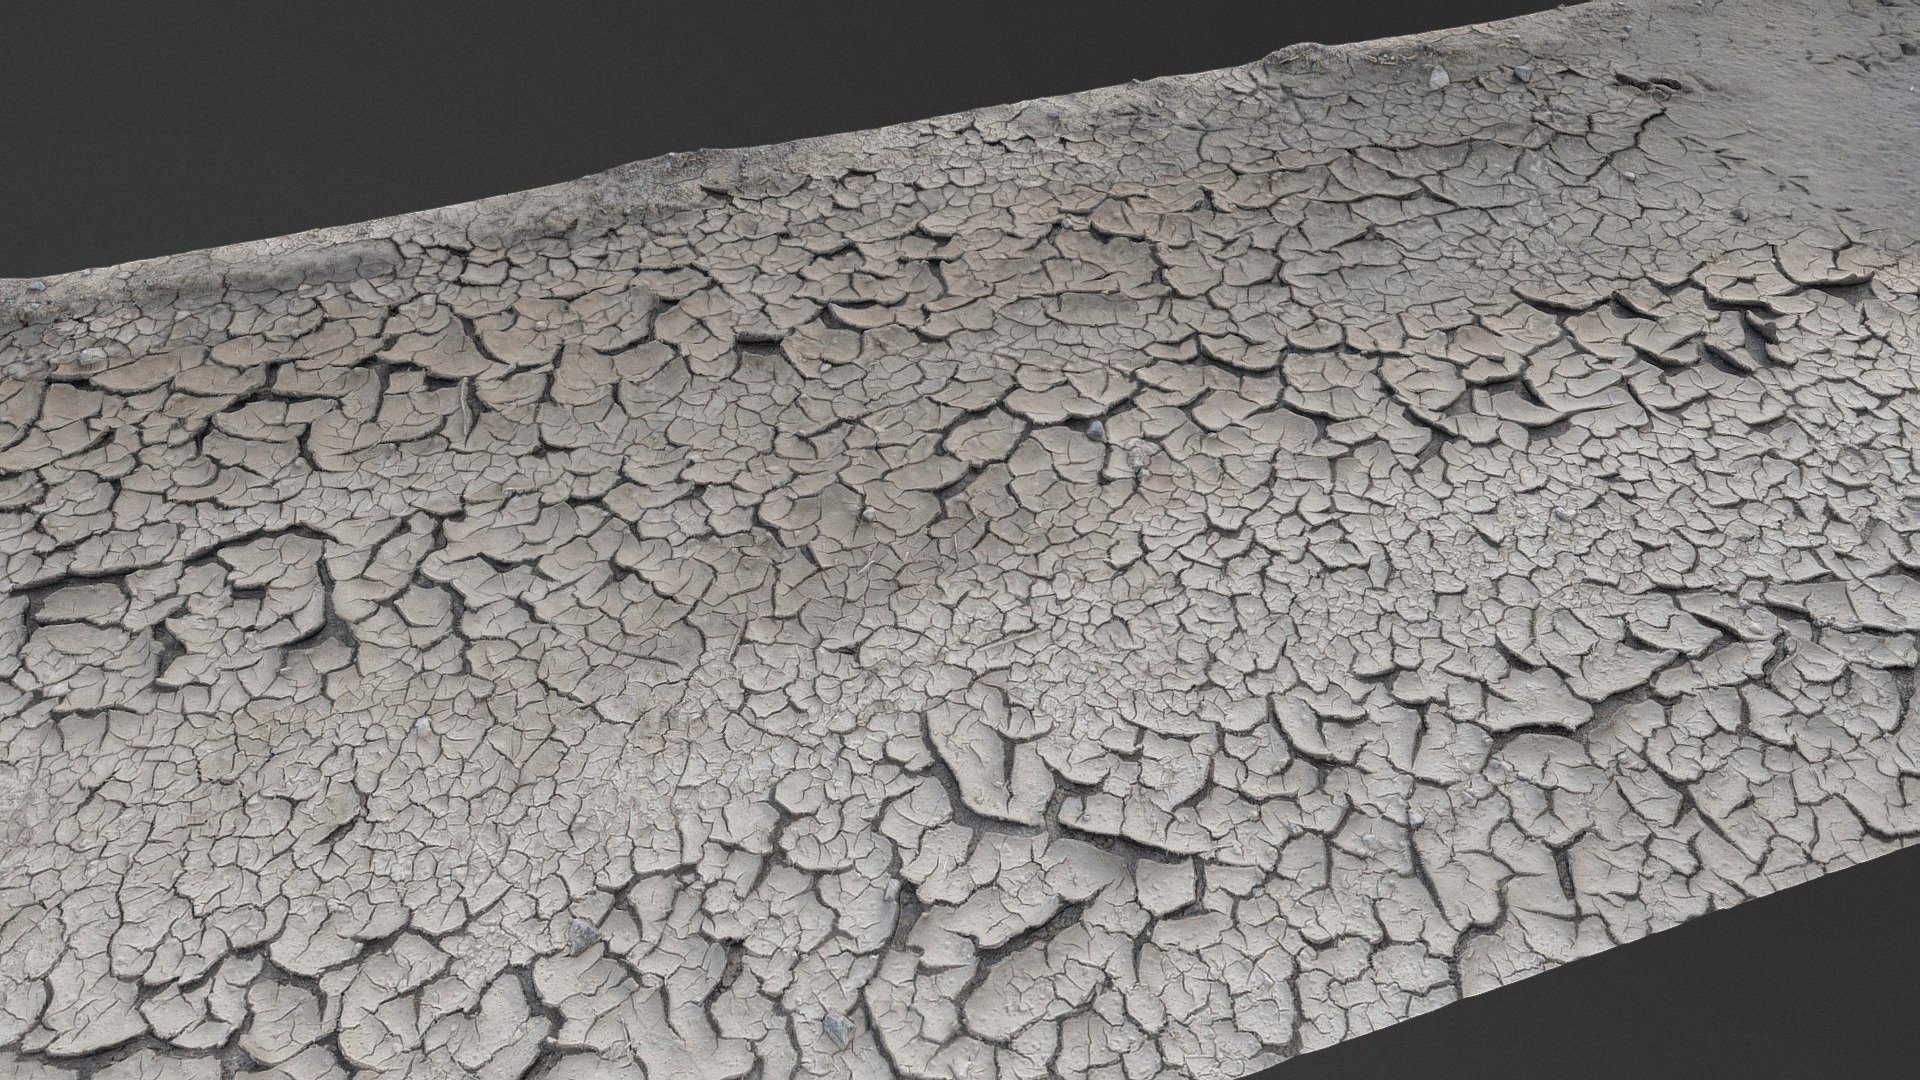 Drought dry soil desert soil land barren eroded ground dust bowl road path with cracks, with puddle with animal tracks

photogrammetry scan (180x36mp), 5x8k textures + hd normals - Dry soil ground road - Buy Royalty Free 3D model by matousekfoto 3d model